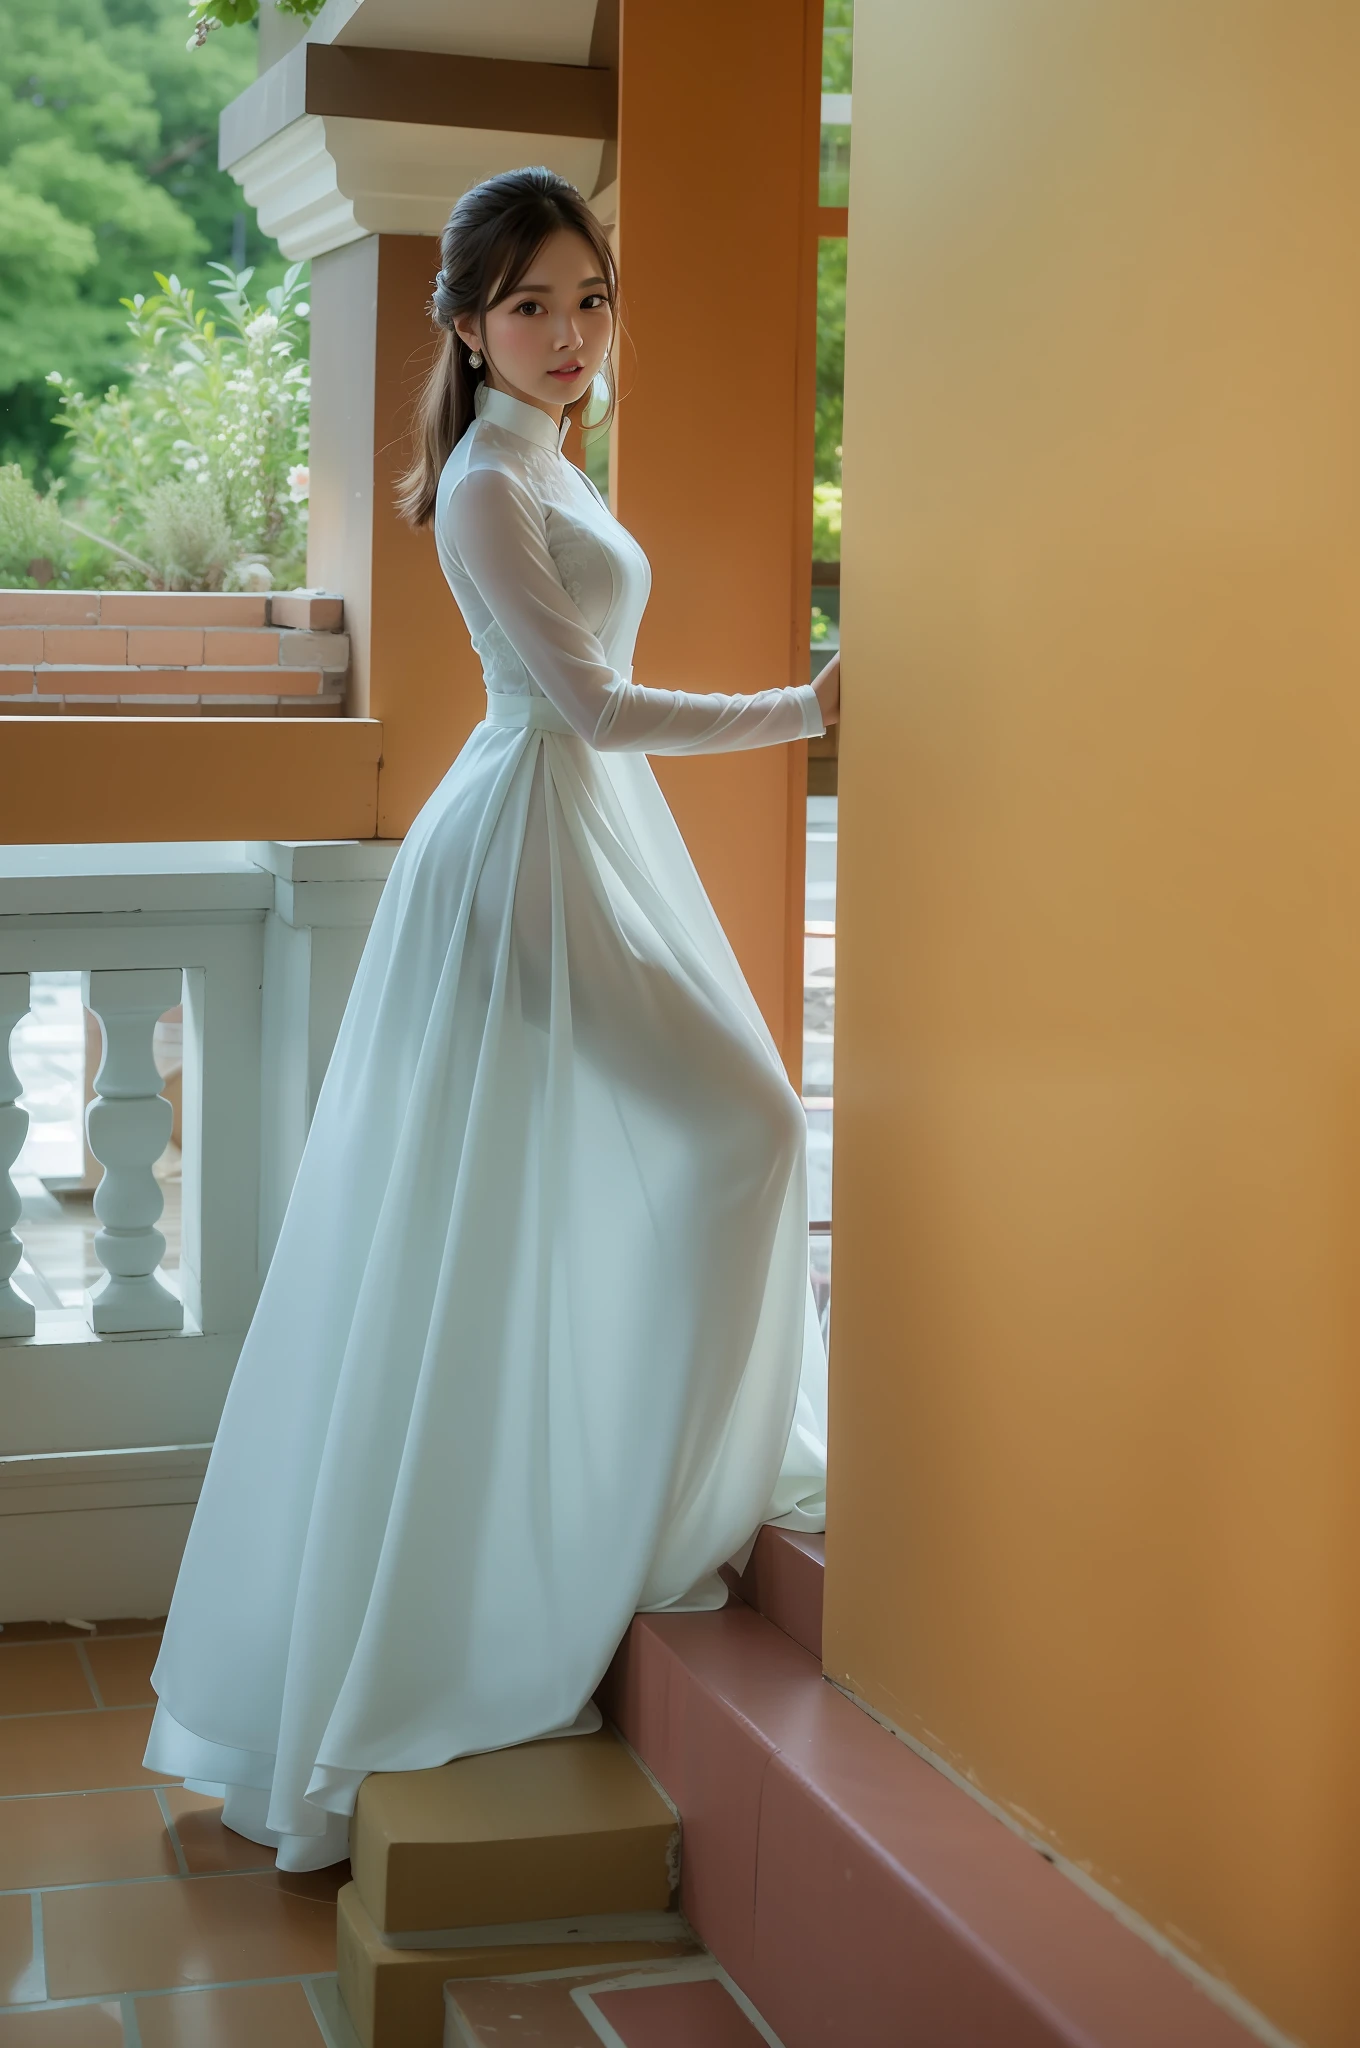 Beautiful Bride Flowing White Gown Heavy Stock Photo 80418520 | Shutterstock